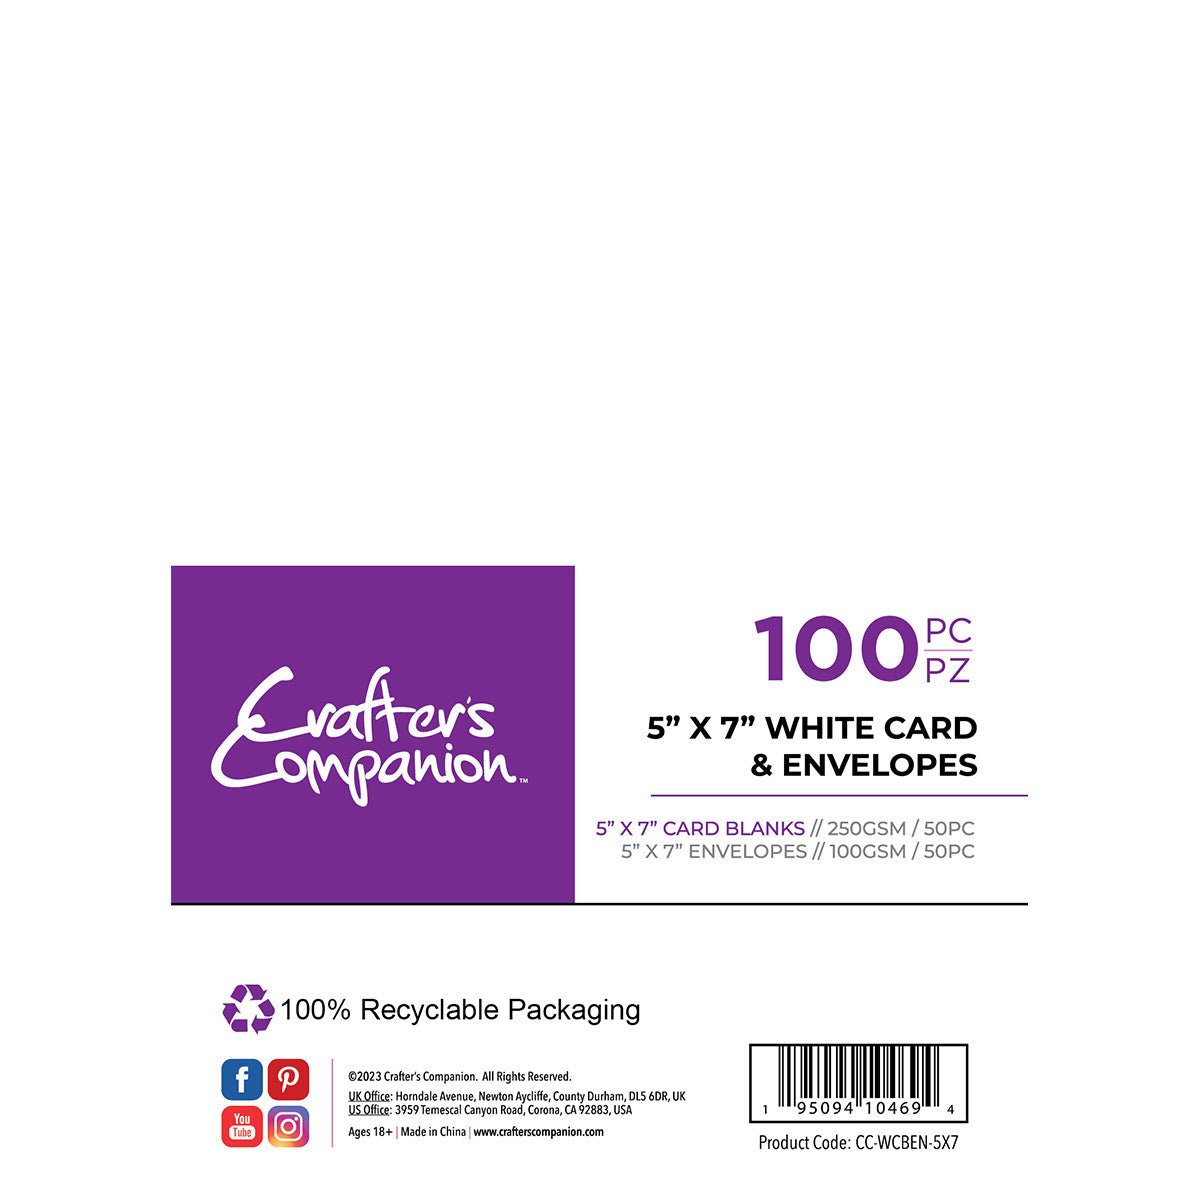 Crafter's Companion - 5" x 7" Cards & Envelopes 100 piece - White